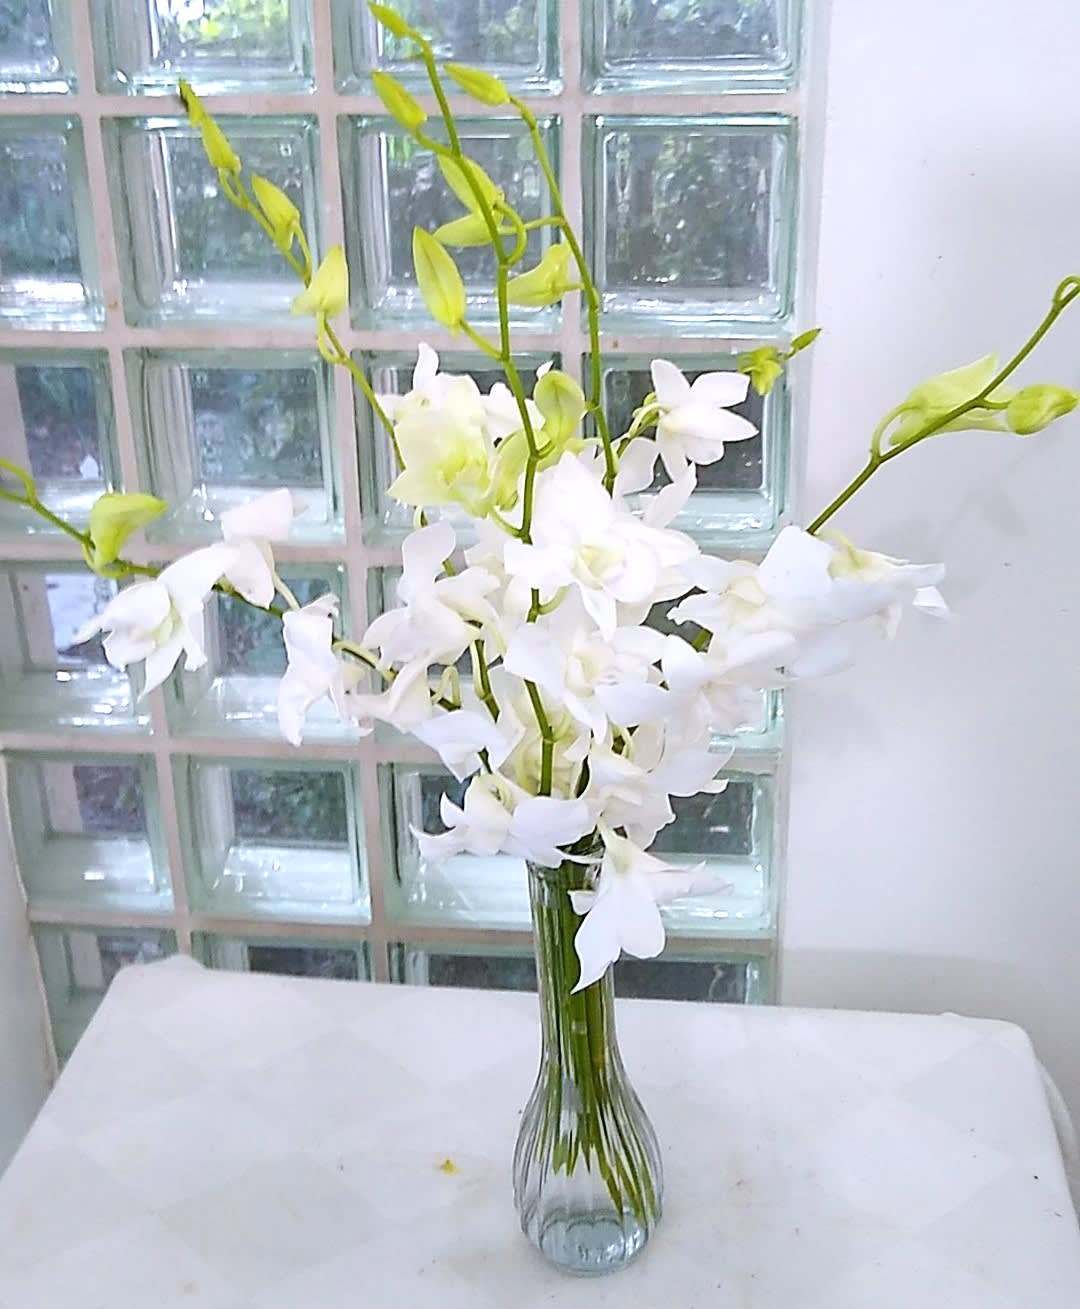 Pacific Paradise in White - An ocean of white orchids in a glass vase. You'll swim in a sea of smiles. 